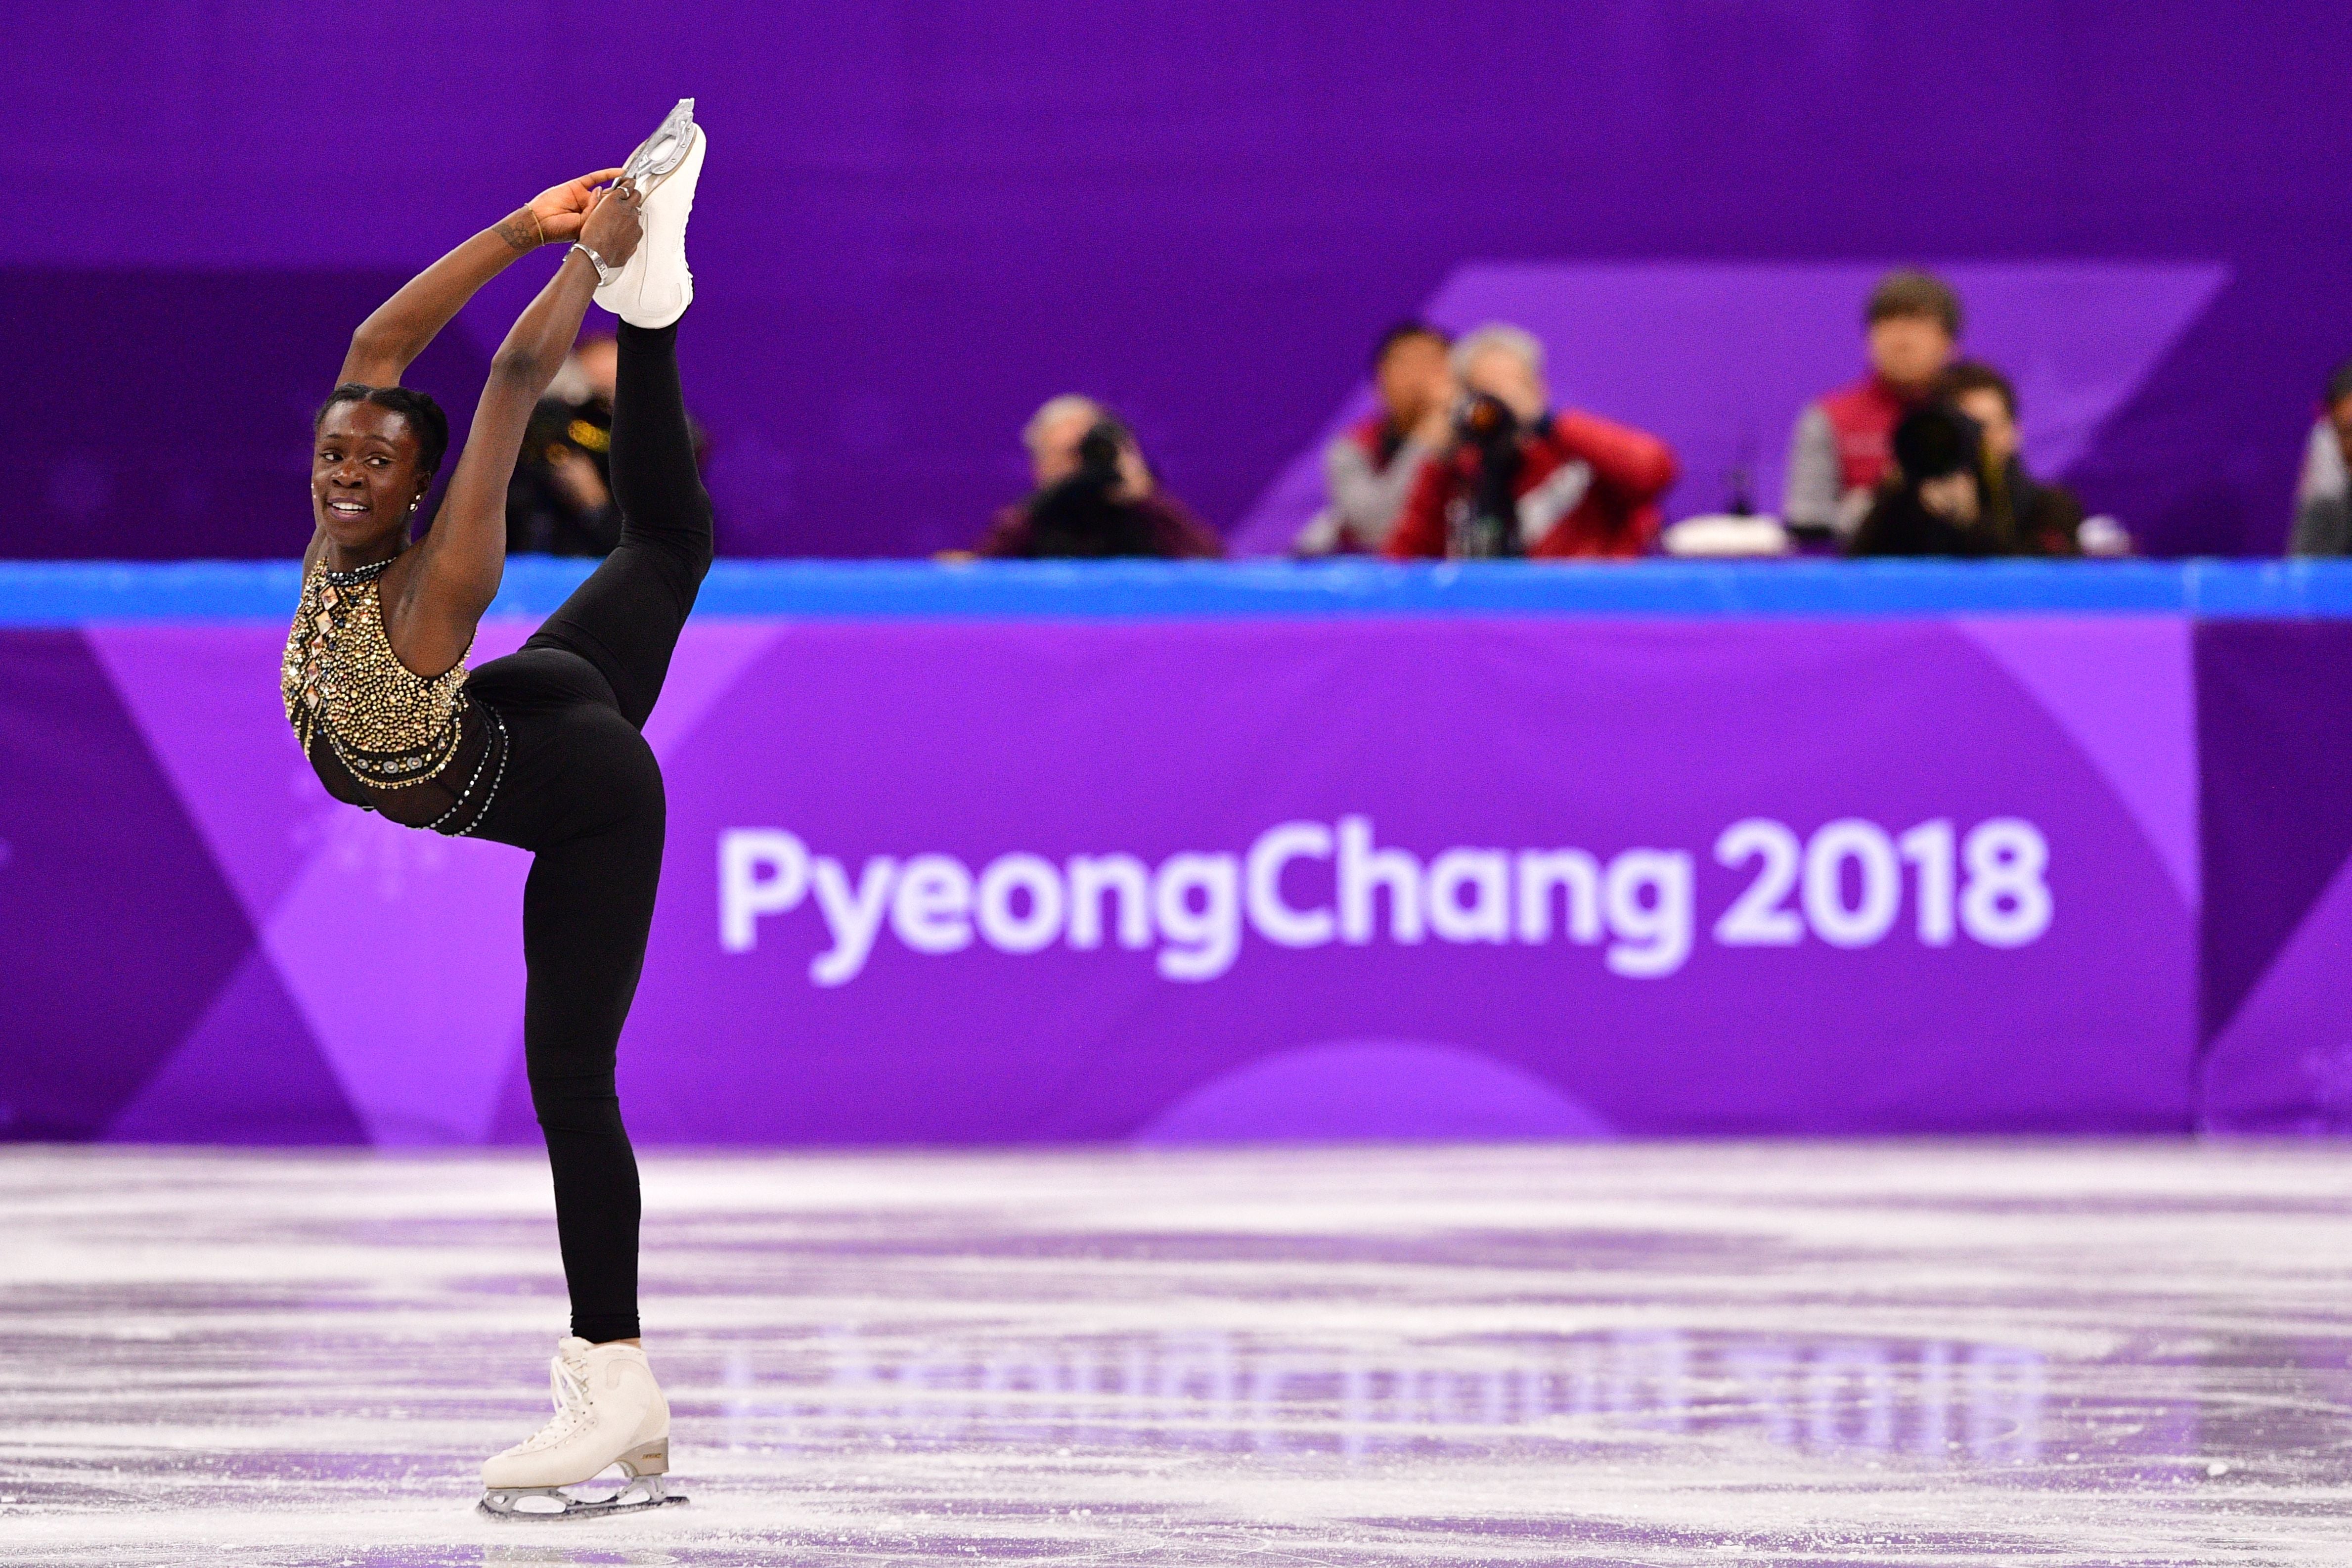 This French Figure Skater Slayed The Ice Rink With Her Beyoncé-Themed Olympic Routine